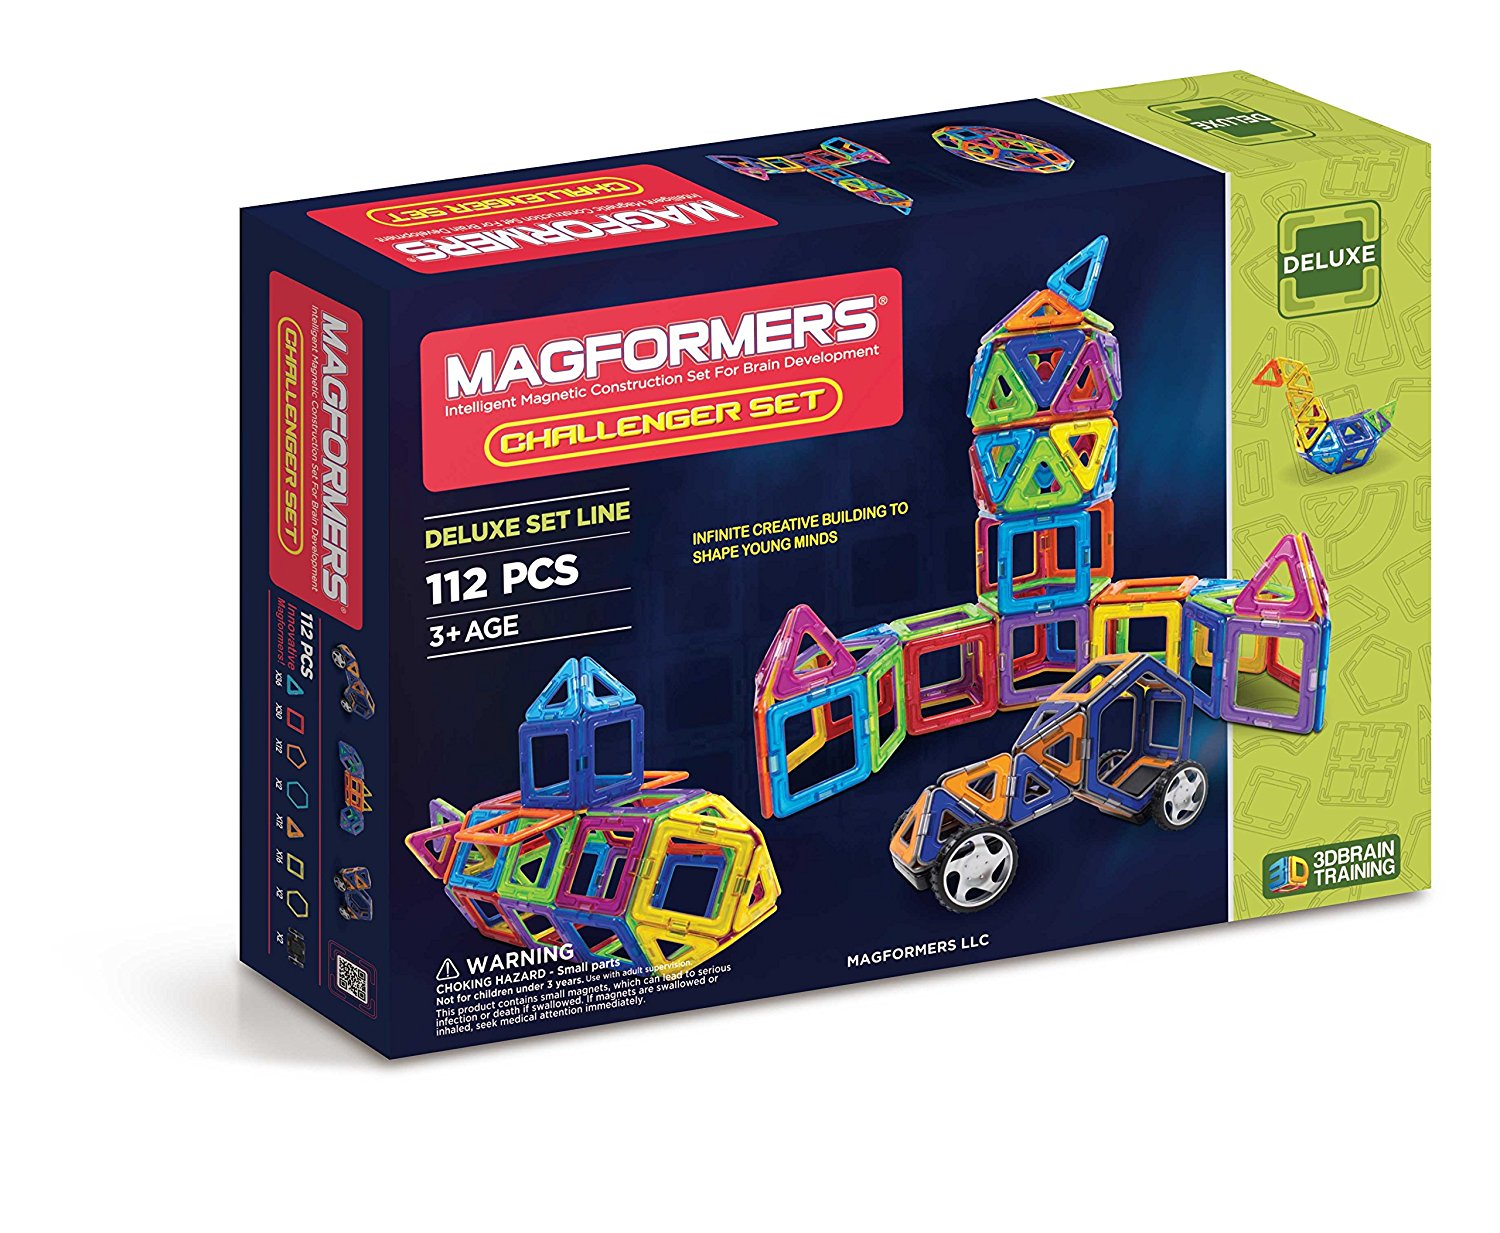 Today only: Magformers sets from $14